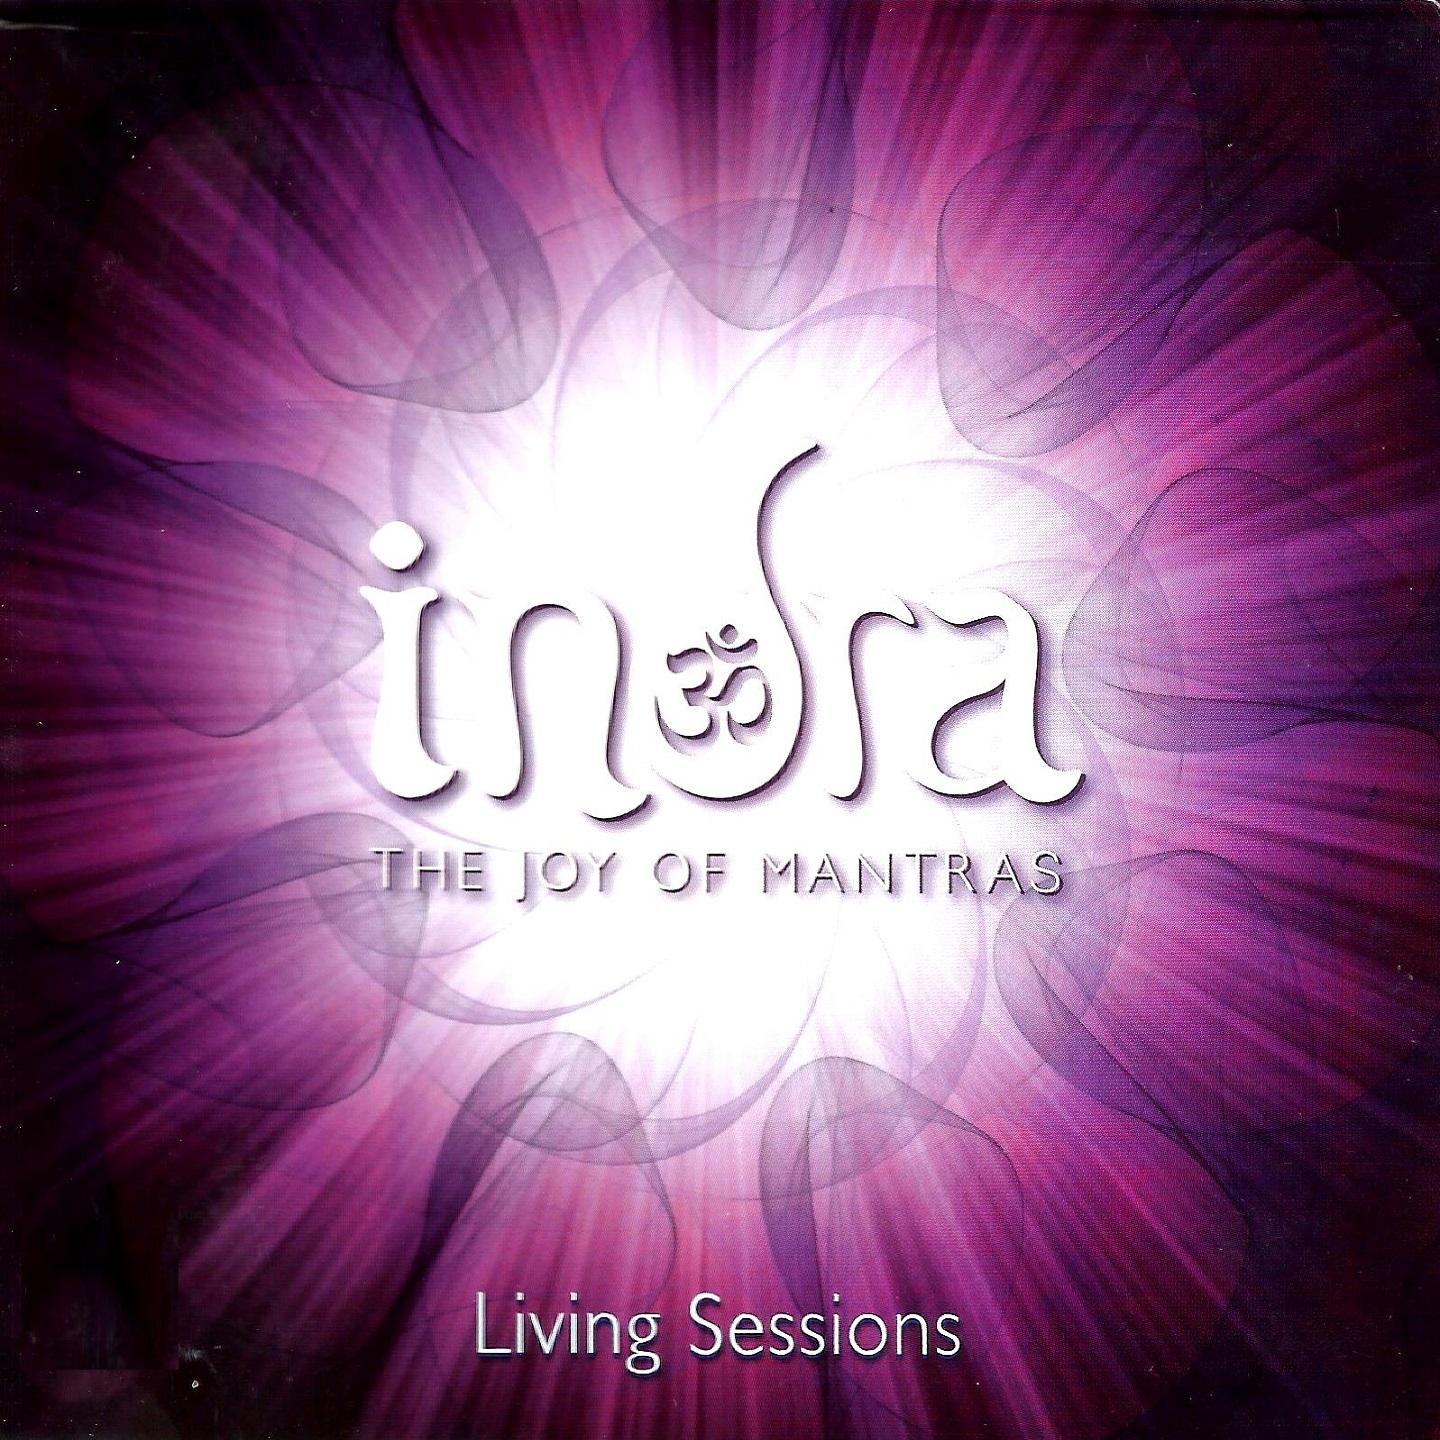 Indra, Living Sessions (The Joy of Mantras)